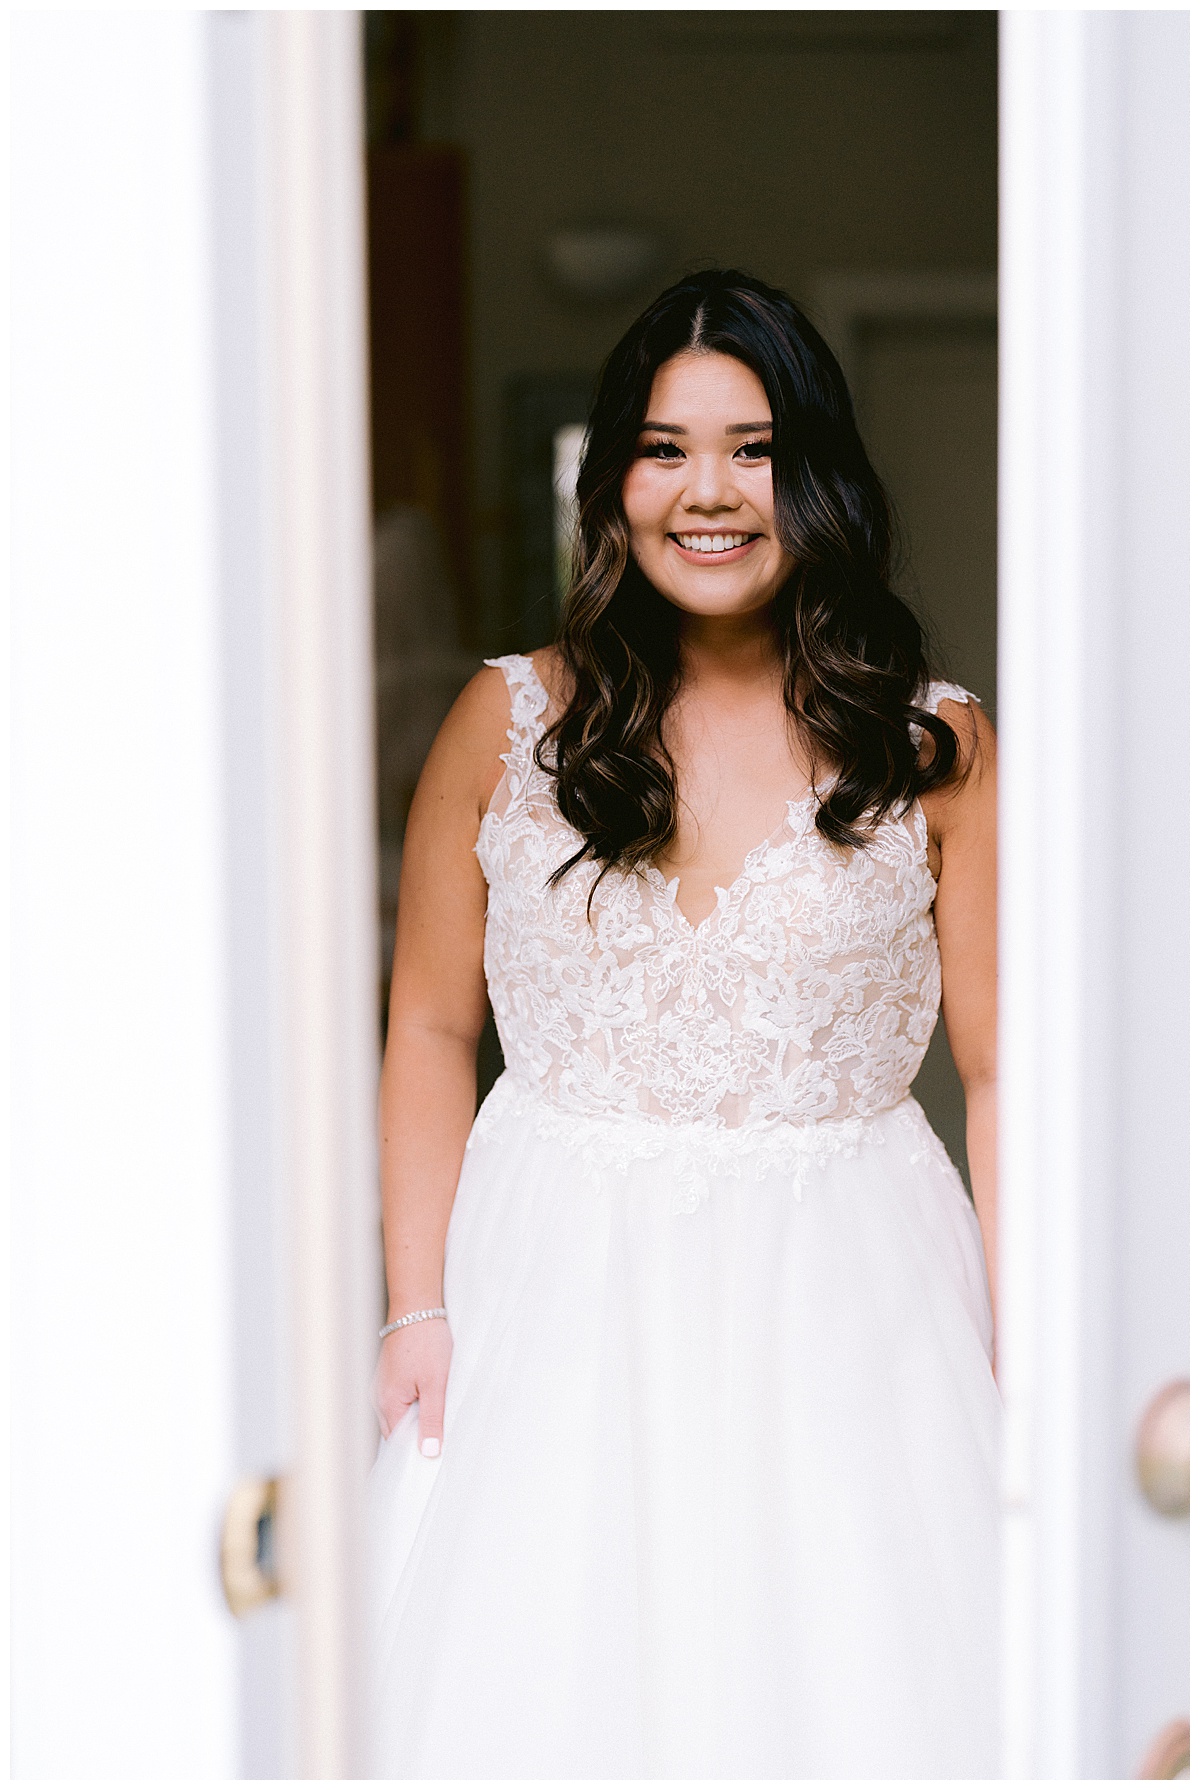 Portrait of Brianna, smiling, before the wedding